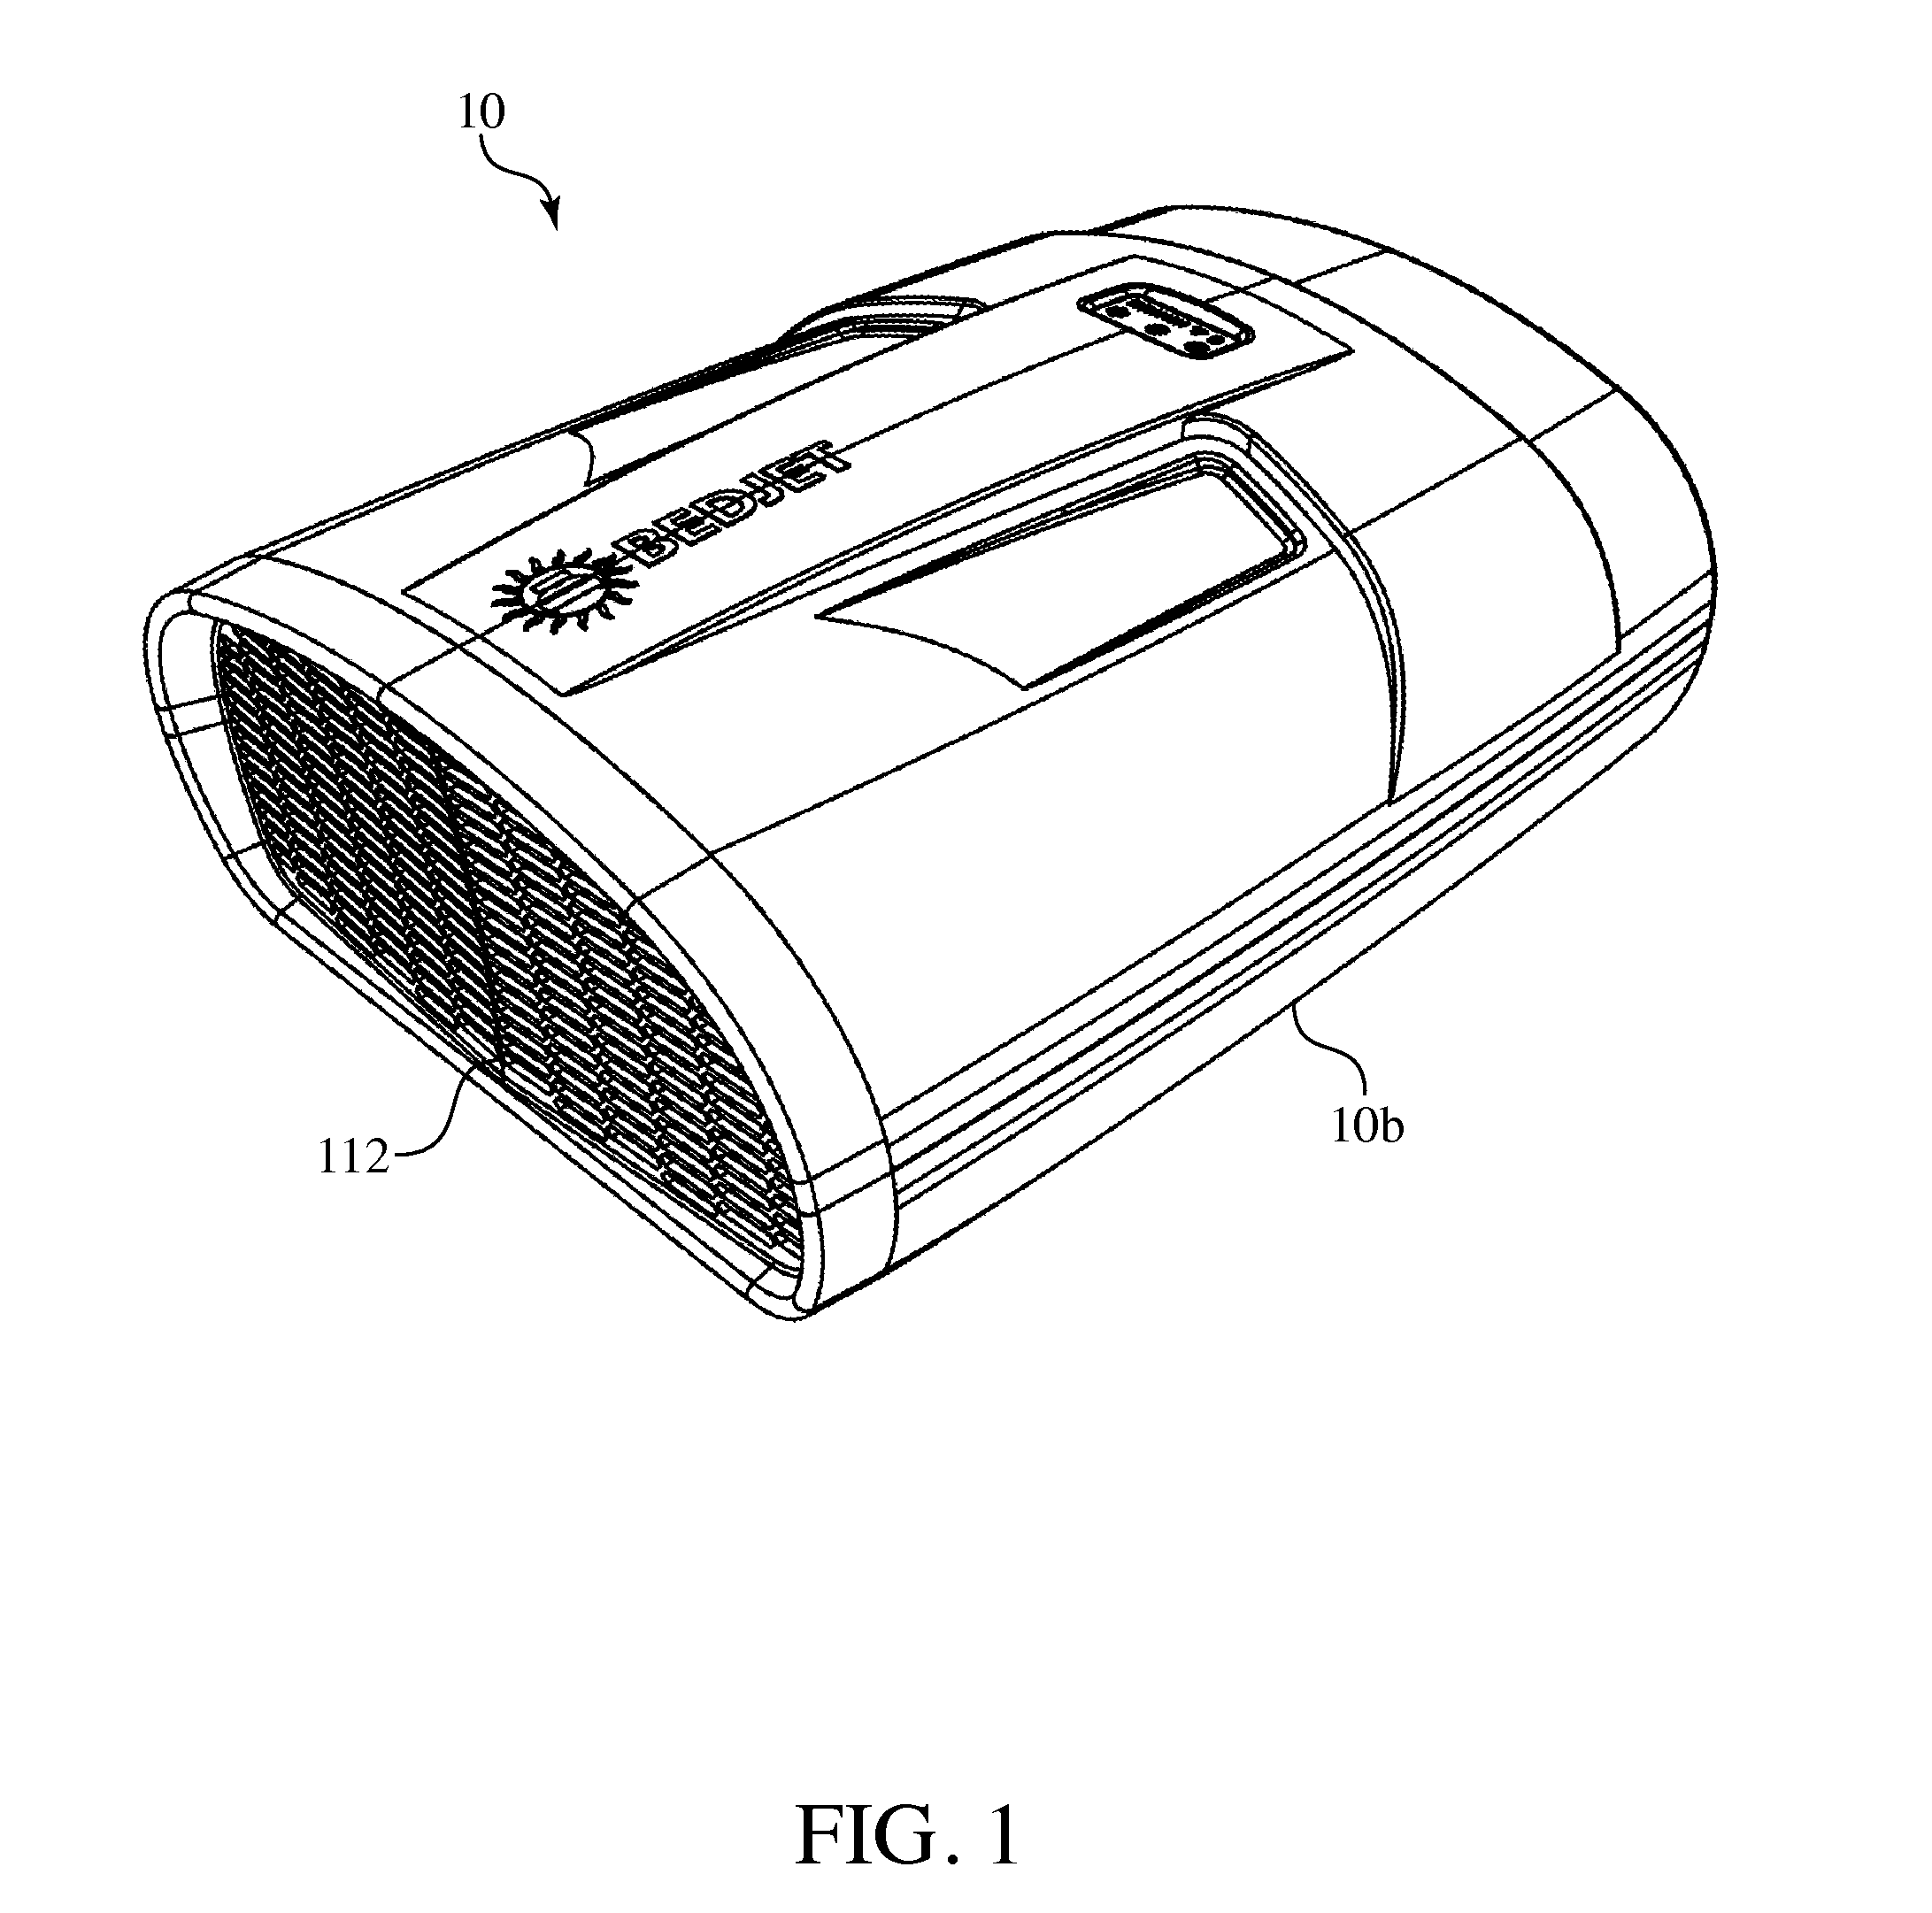 Remote operation of a bedding climate control apparatus